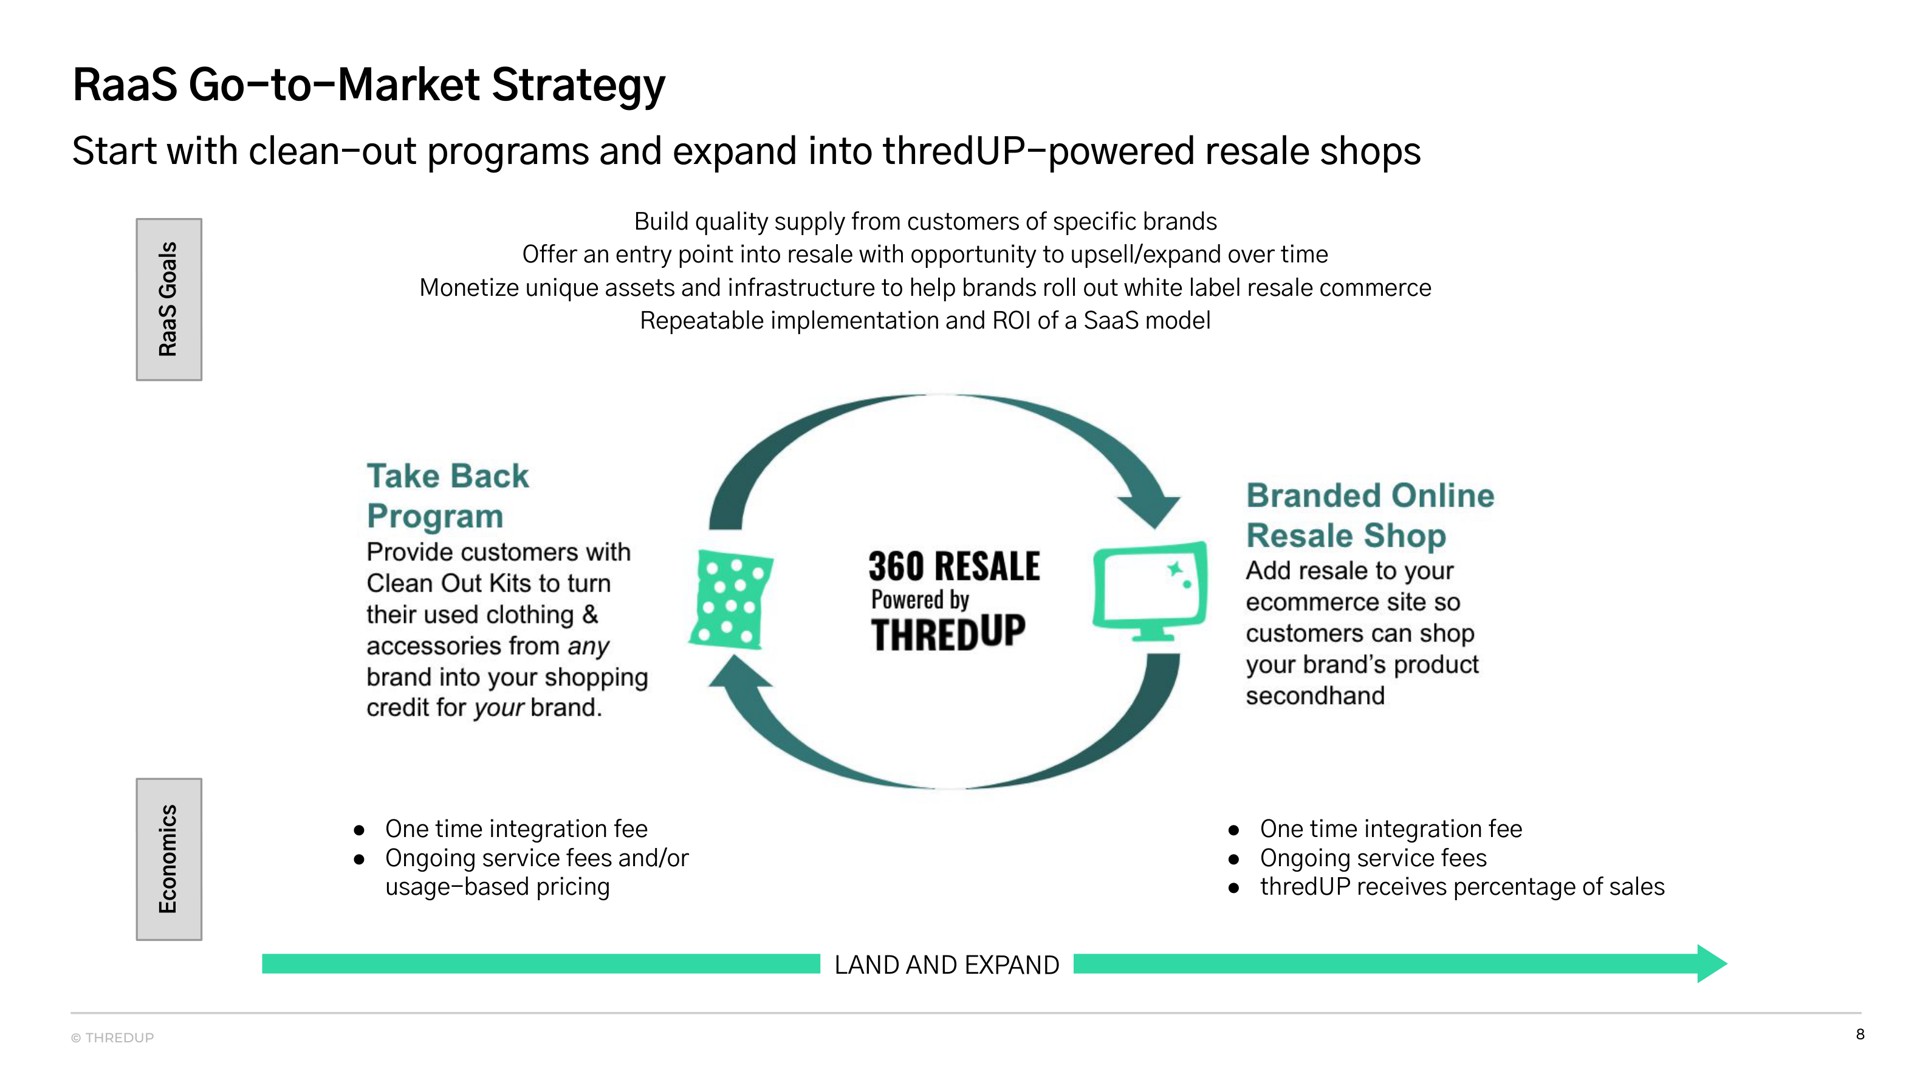 go to market strategy start with clean out programs and expand into powered resale shops | thredUP